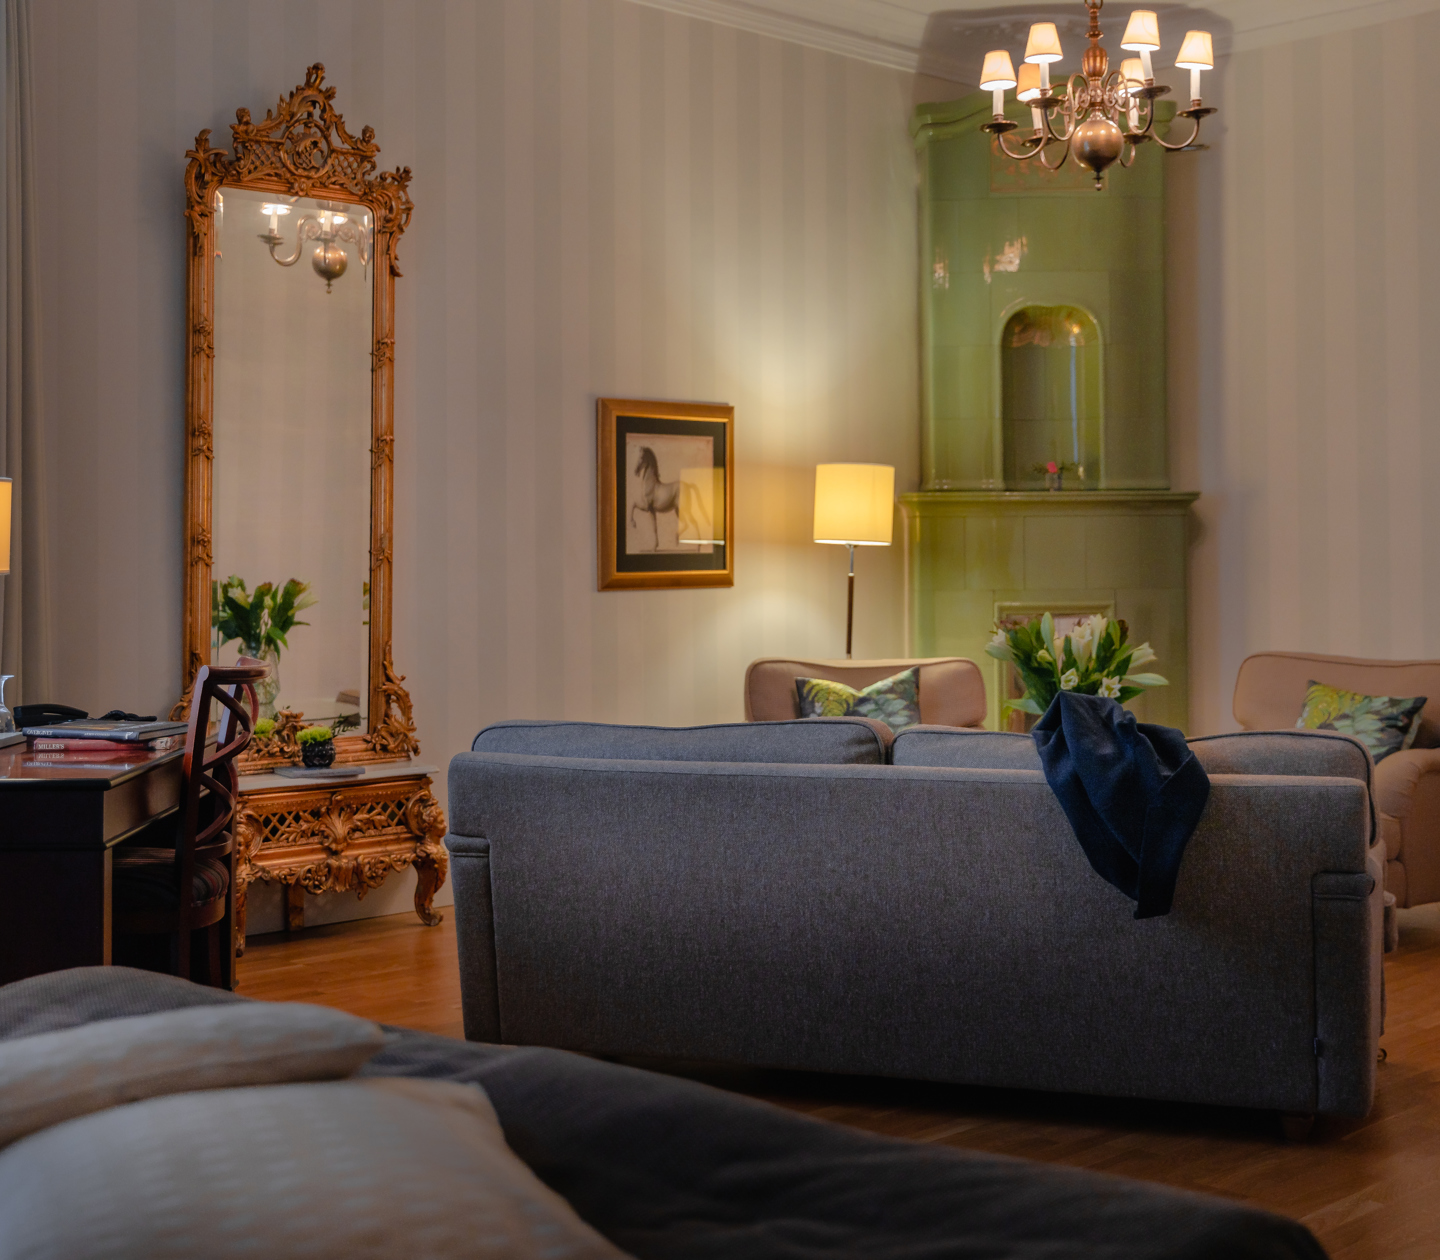 Suite with sofa, golden mirror and green tiled stove